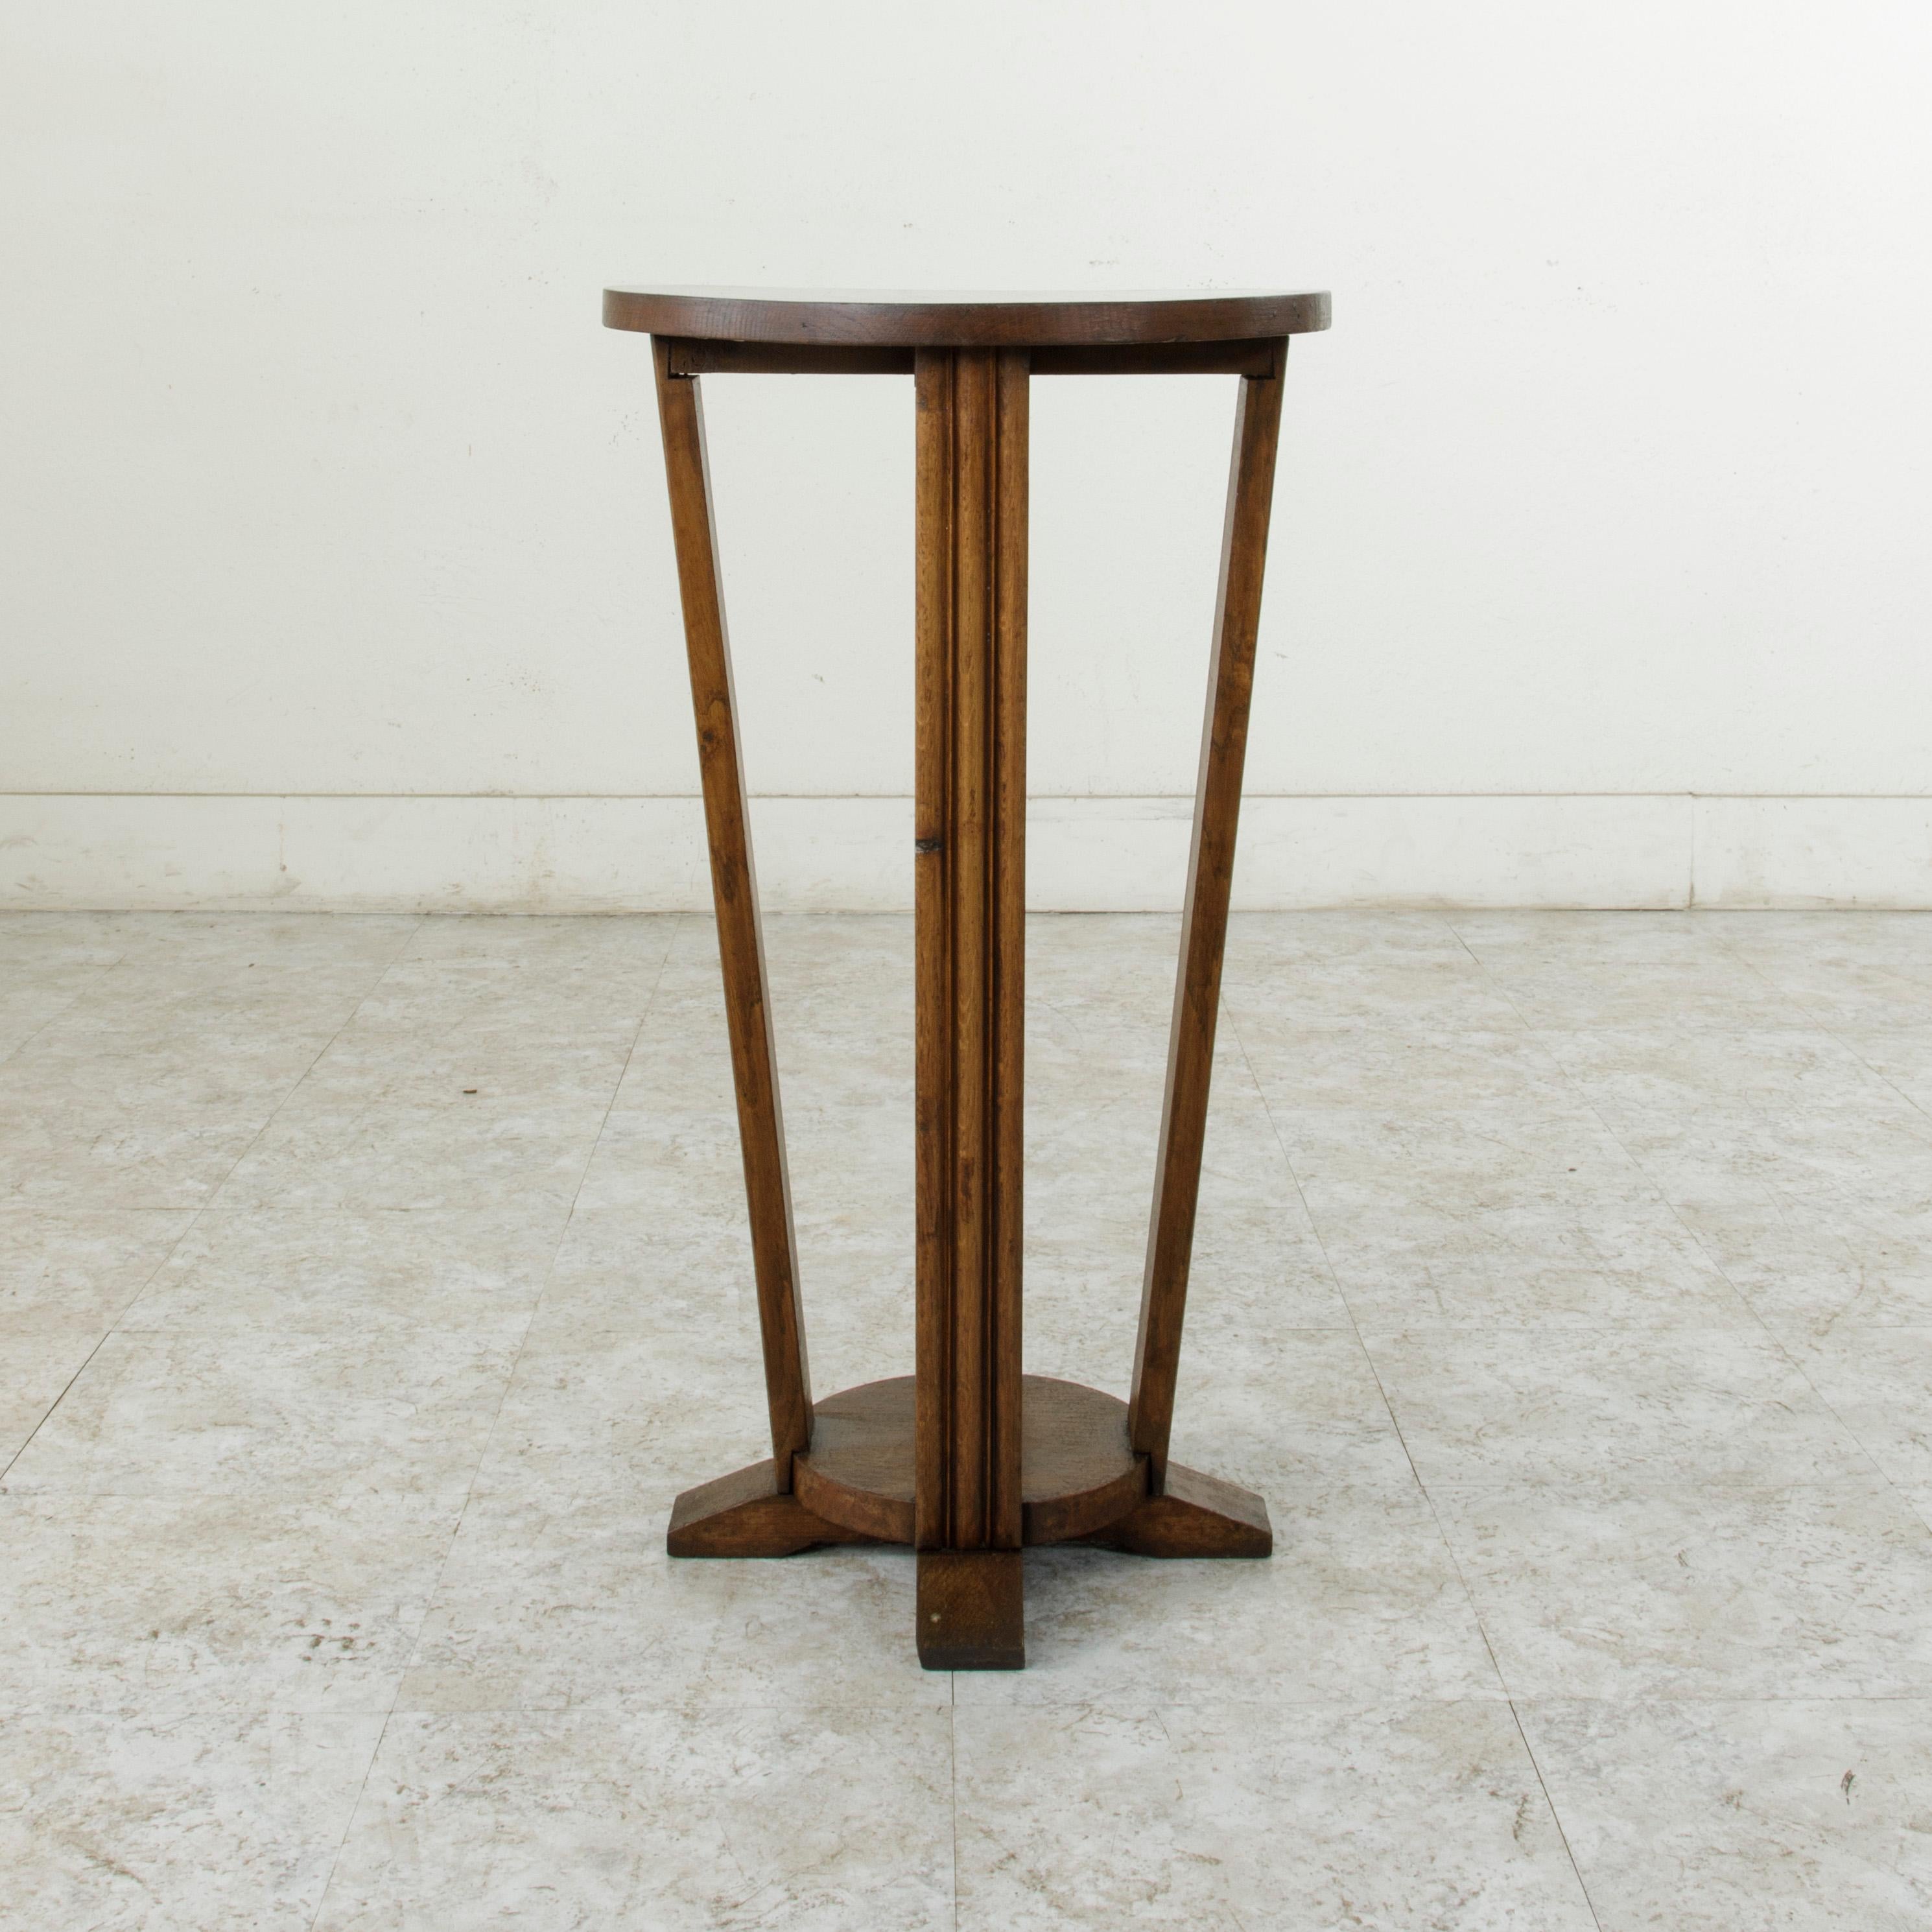 19th Century Early 20th Century French Art Deco Period Oak Pedestal, Side Table, Fern Stand